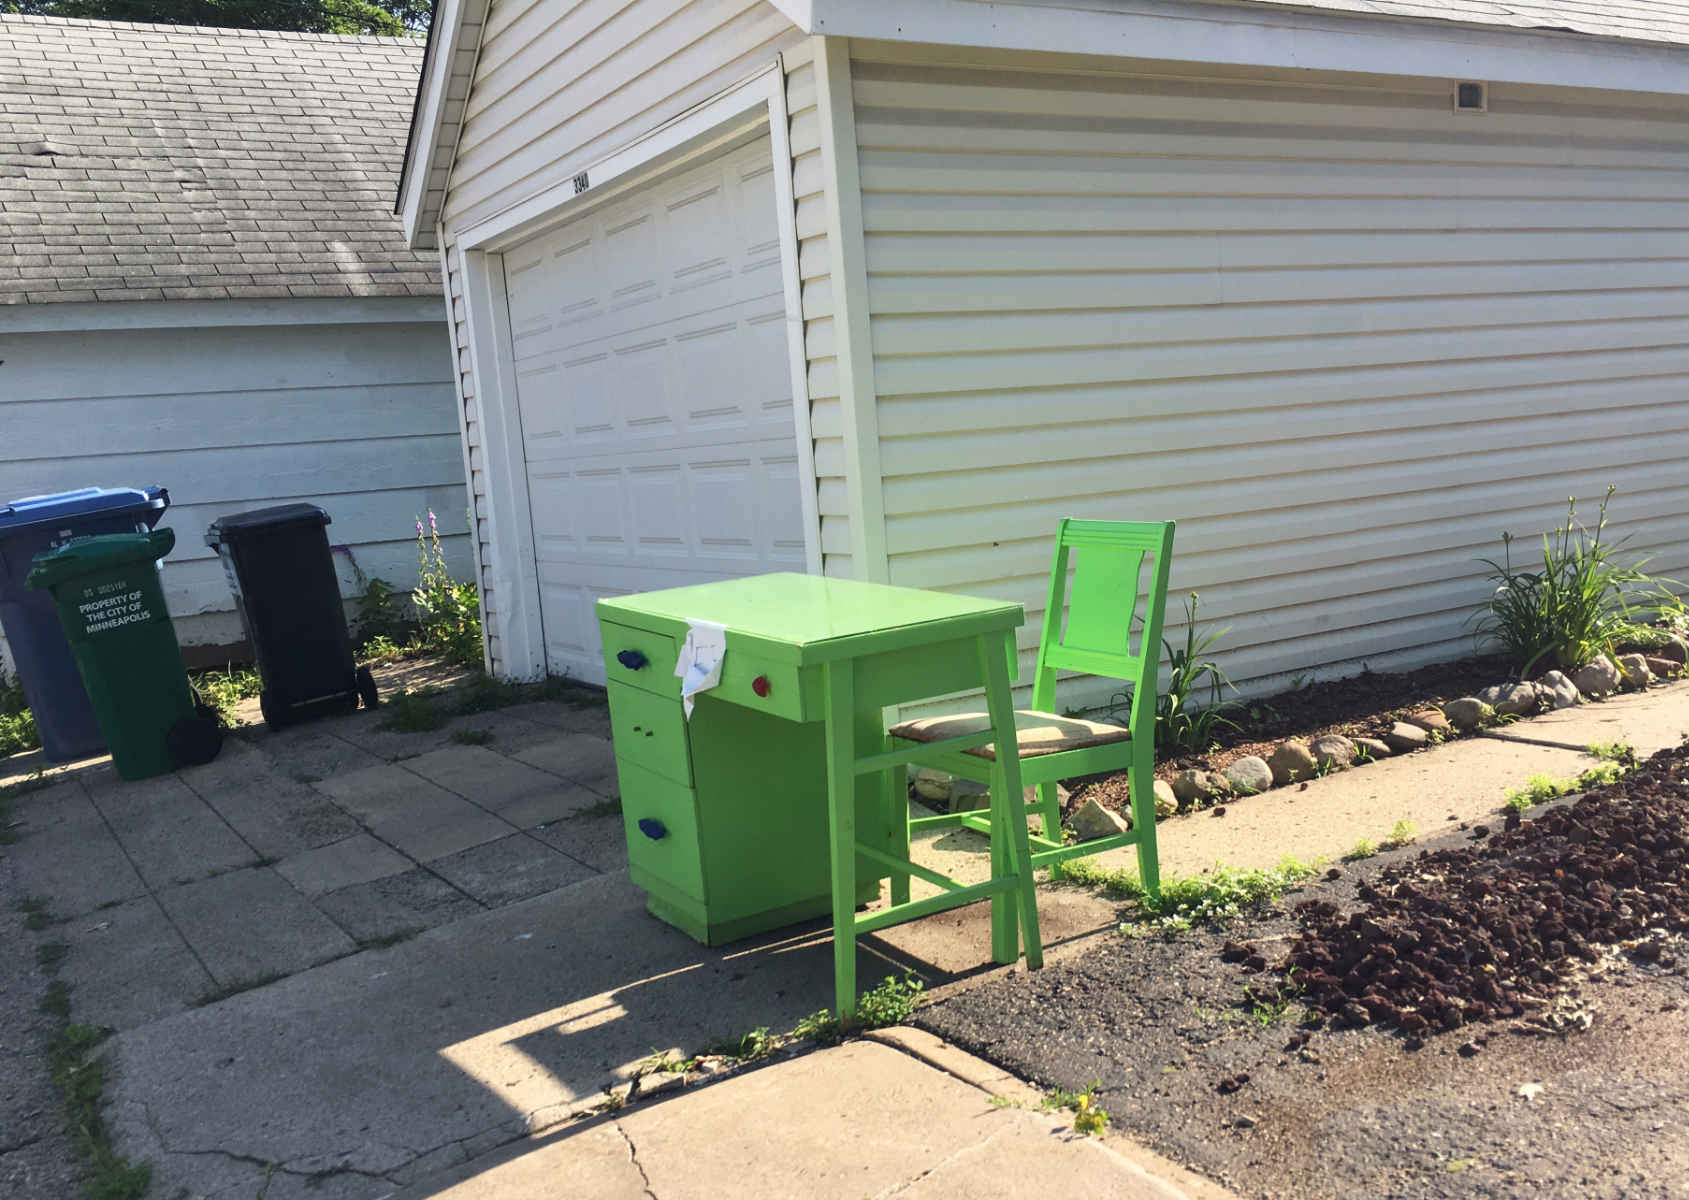 bright light green desk and chair in sun next to a white garage in shade